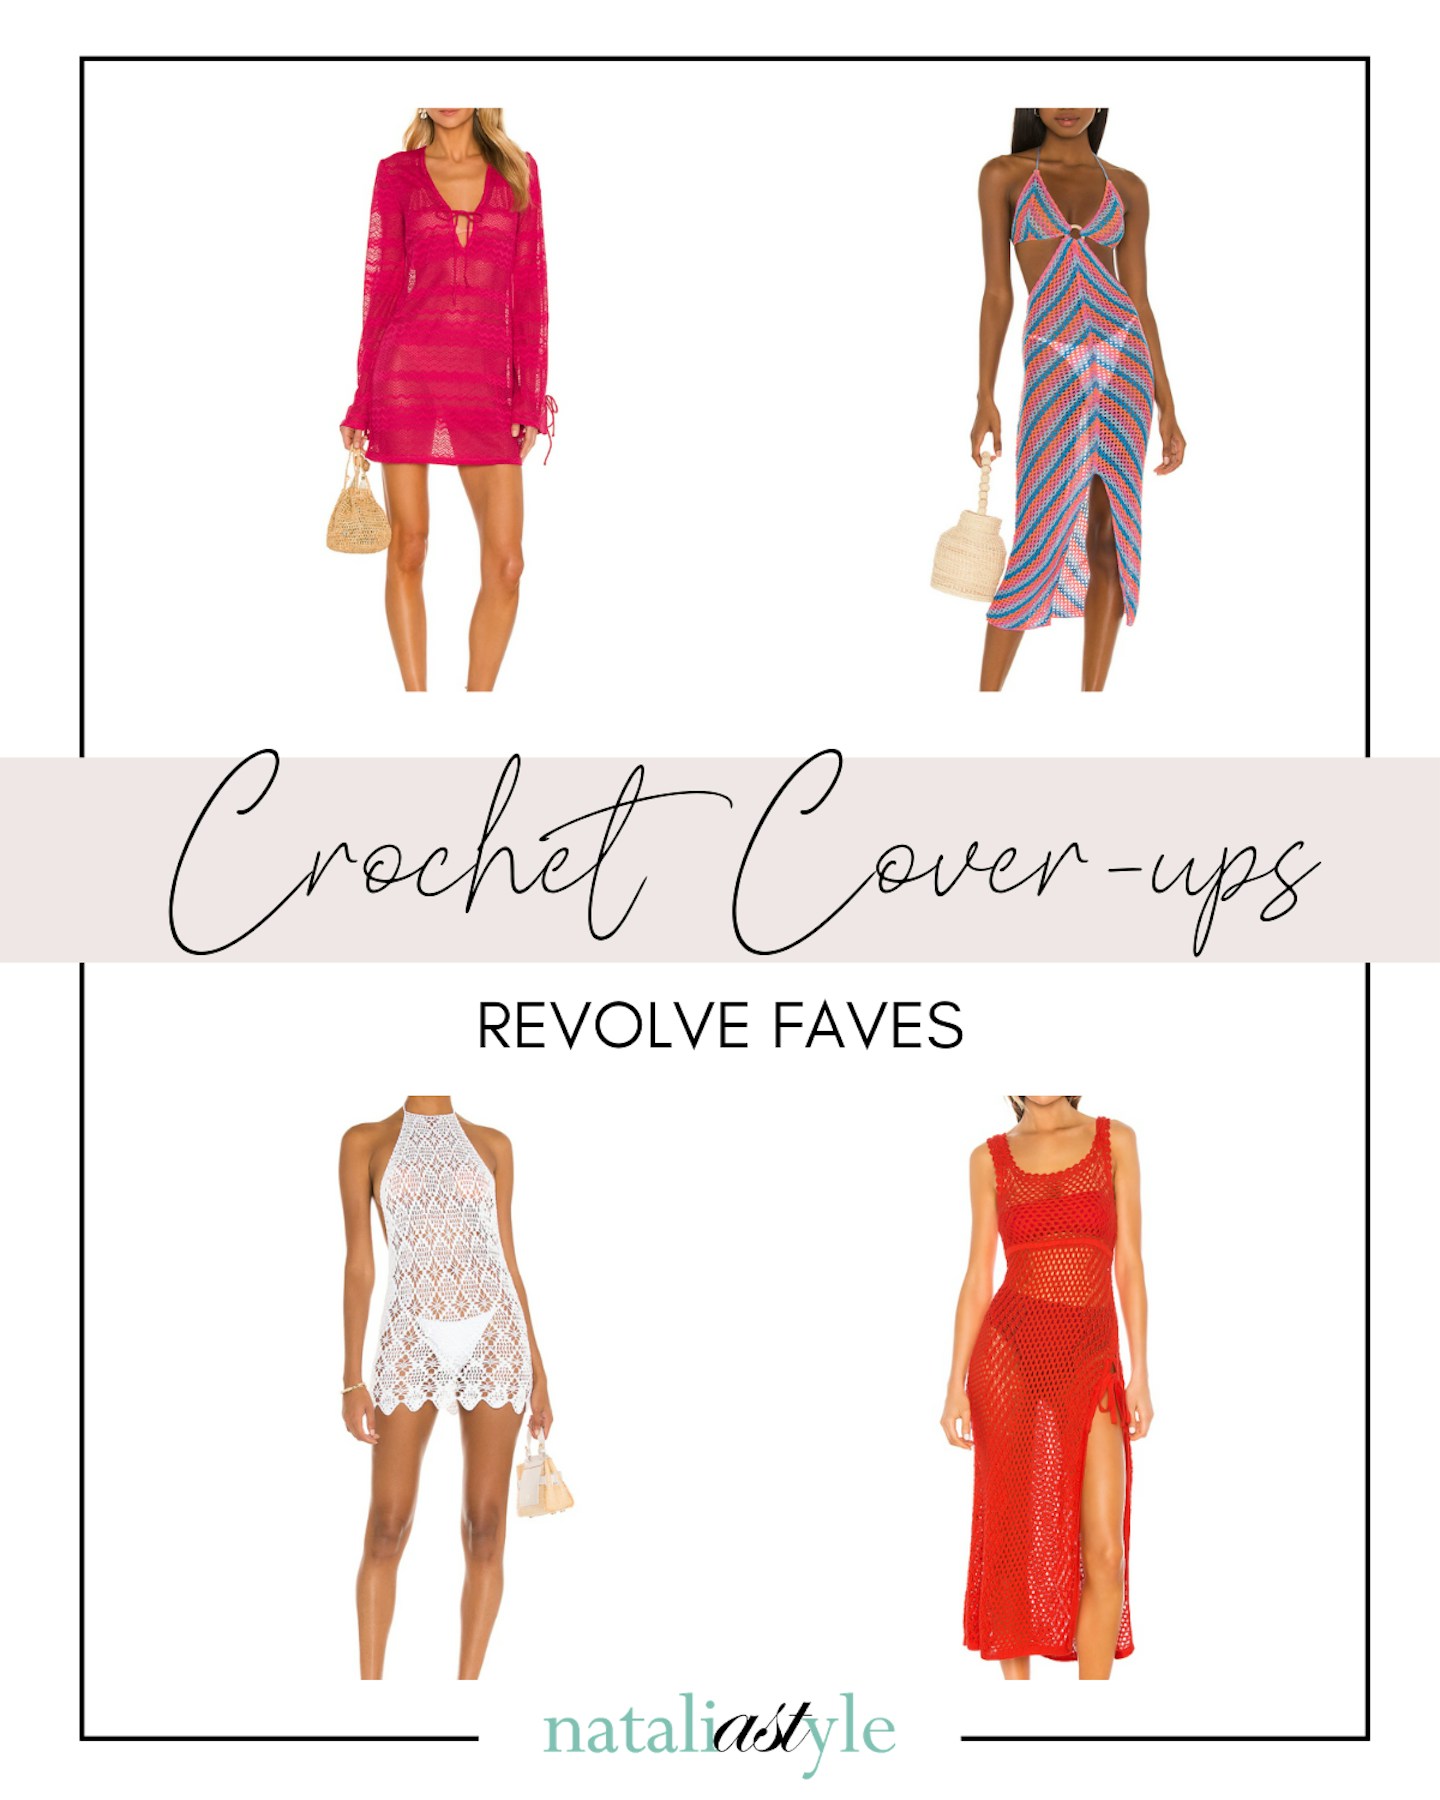 A crochet cover-up is a must for Summer 2021. These crochet swimsuit coverups are perfect for the beach or poolside, featuring fun colours and eye-catching designs.